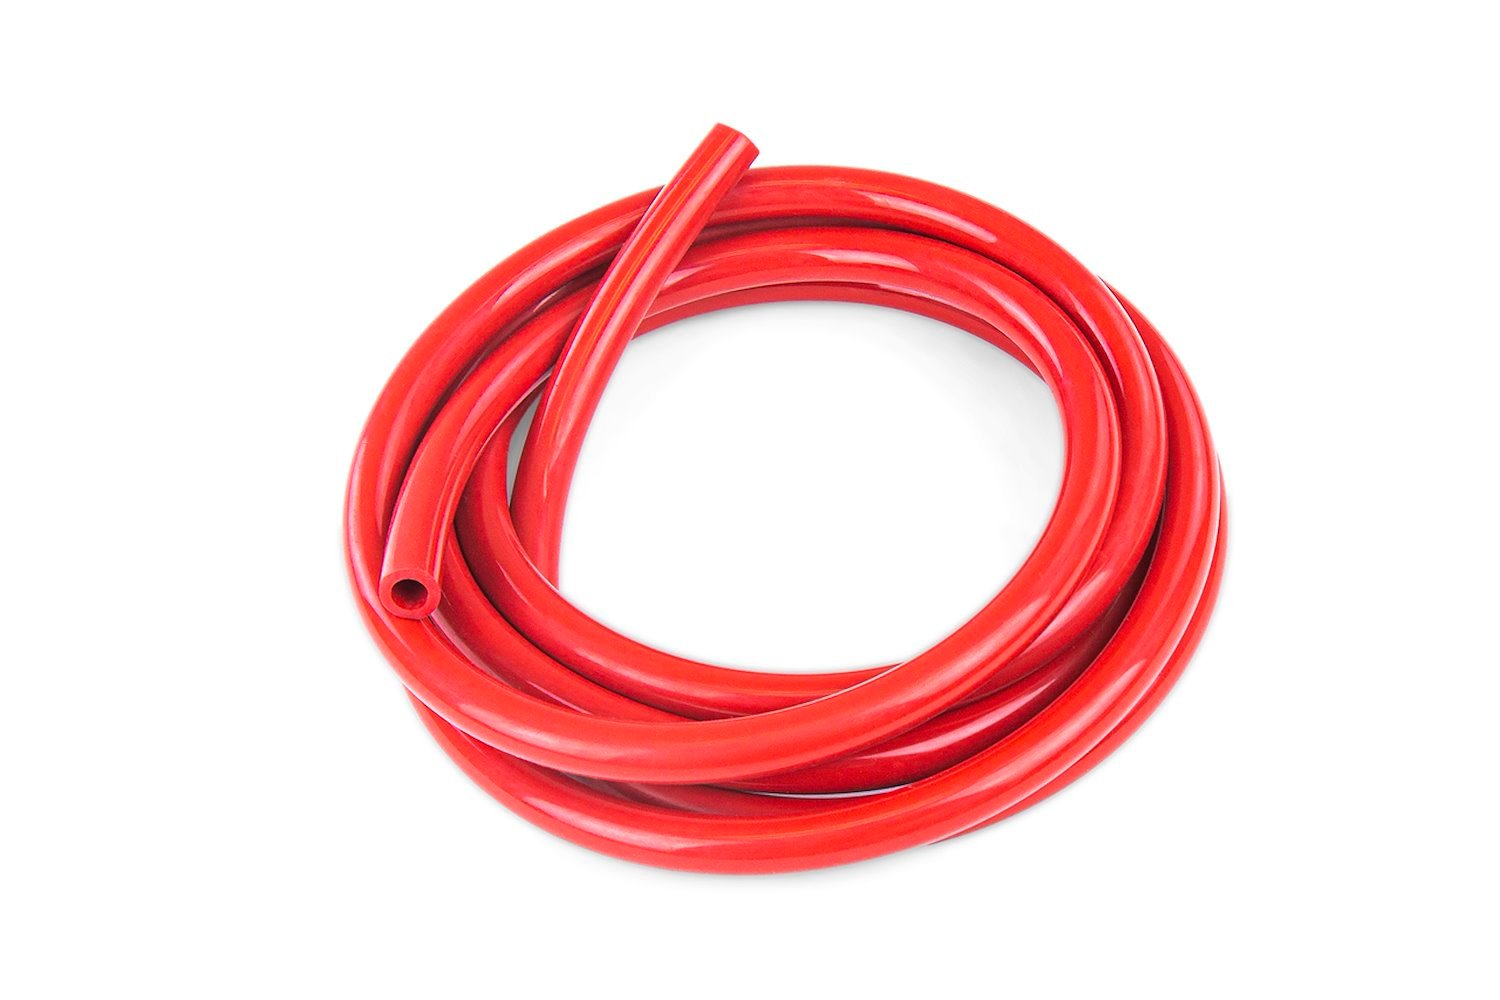 HTSVH10-REDx25 High-Temperature Silicone Vacuum Hose Tubing, 10 mm ID, 25 ft. Roll, Red